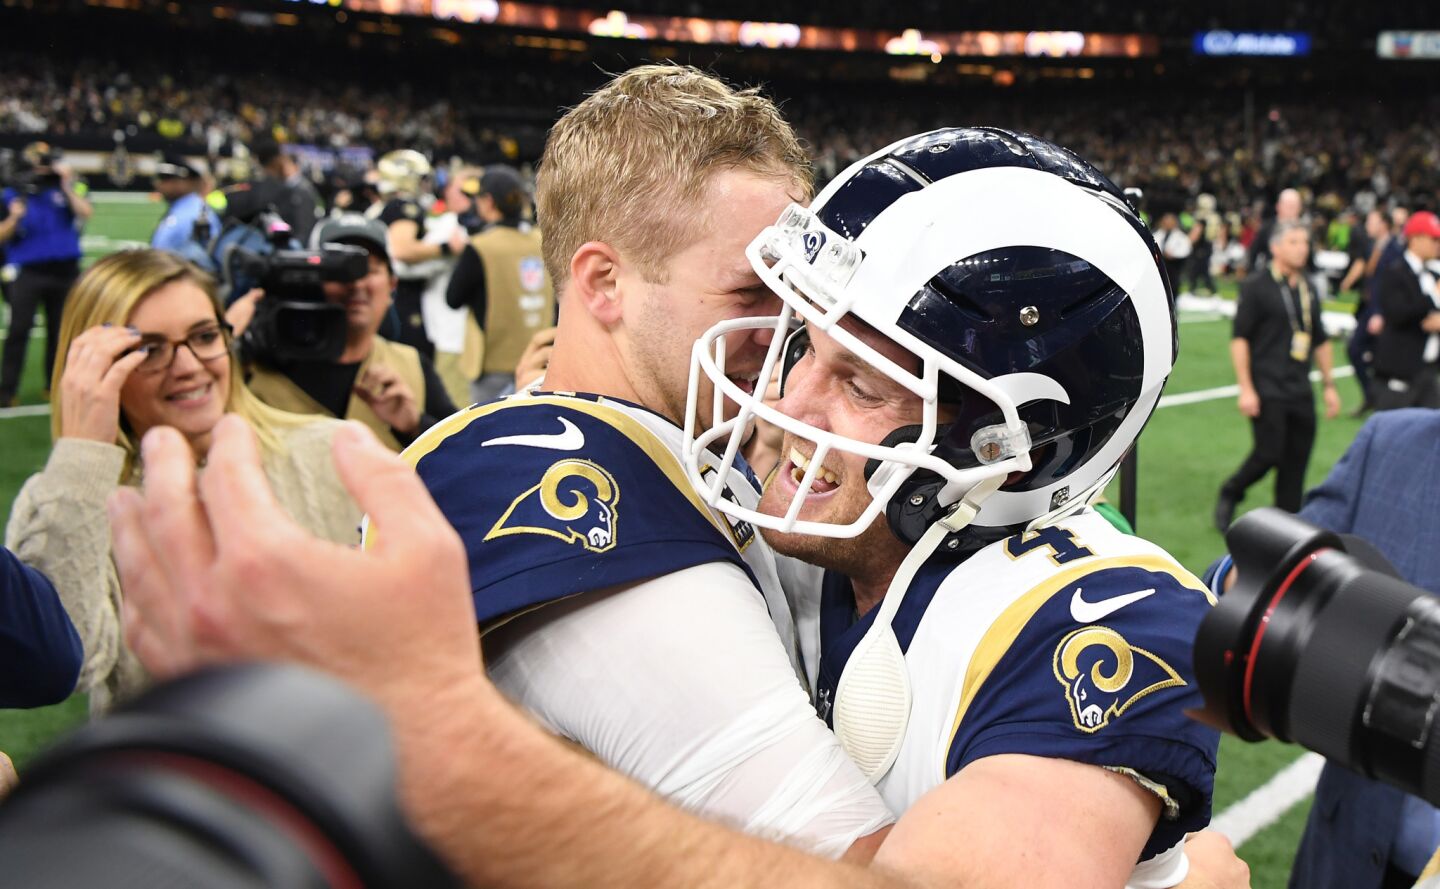 Rams quarterback Jared Goff hugs kicker Greg Zuerlein after defeating the New Orleans Saints in overtime on a field goal in the NFC Championship at the Superdome in New Orleans Sunday.